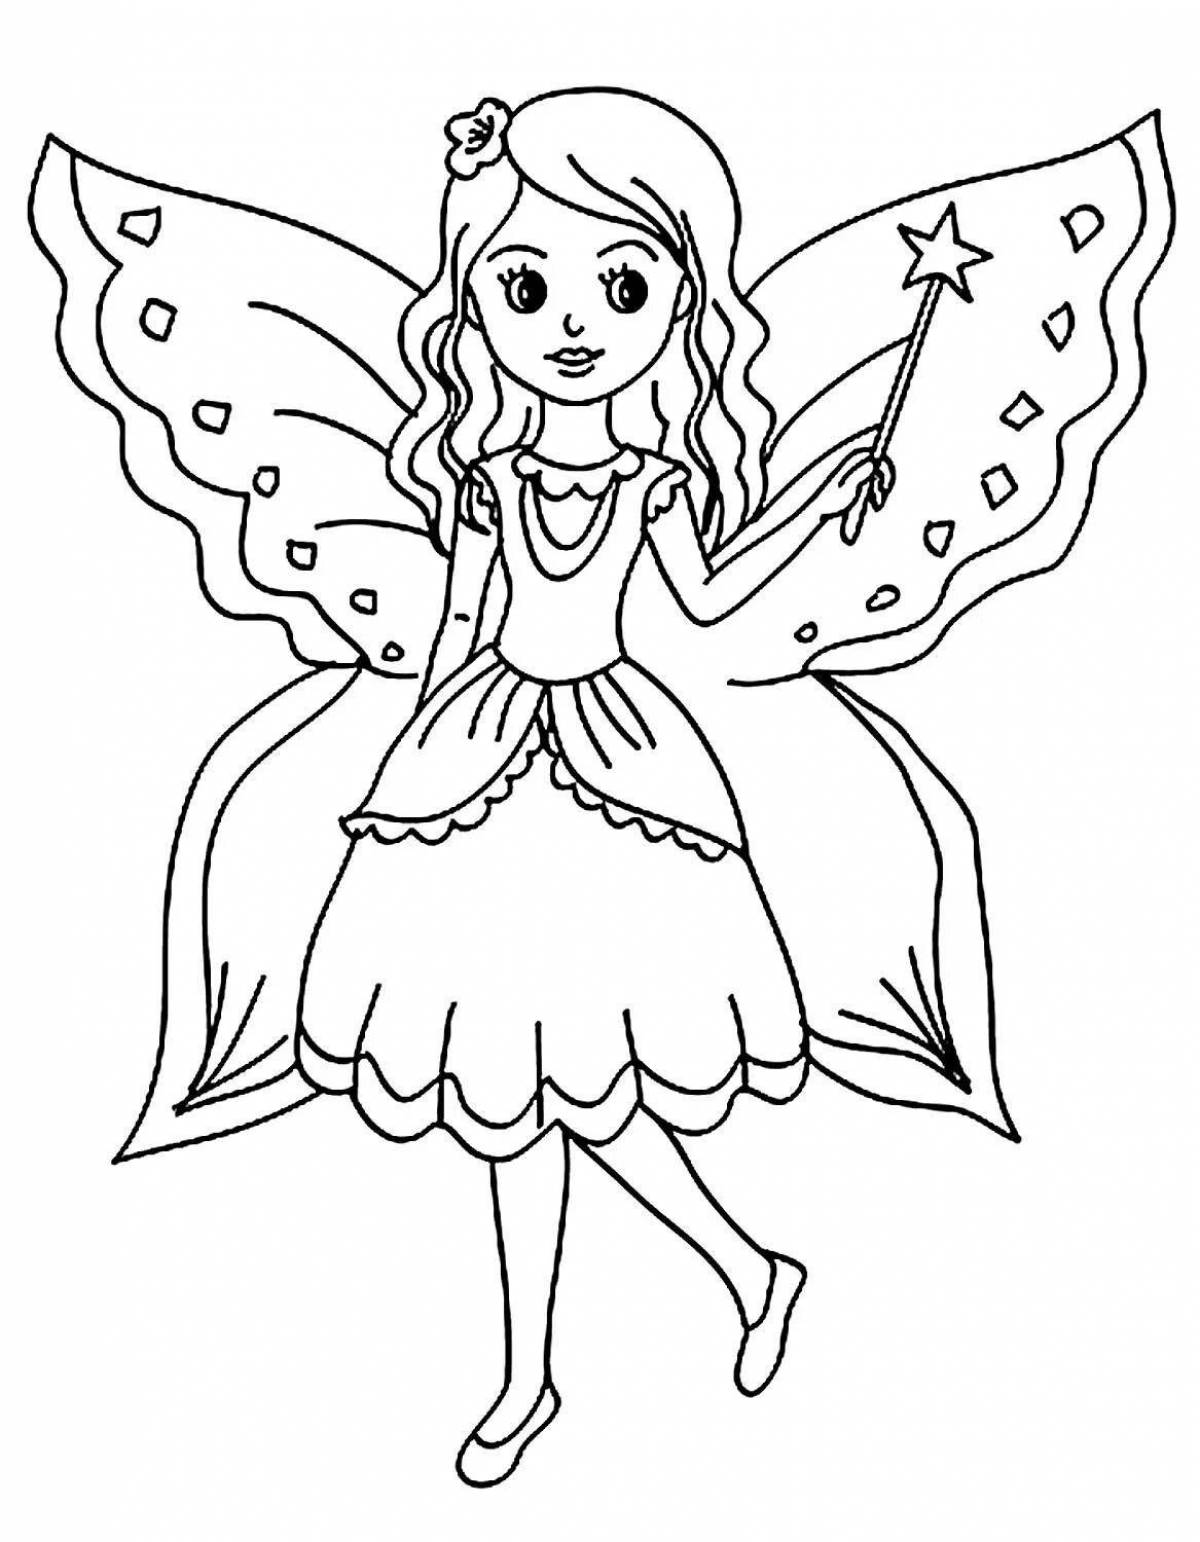 Fairy fun coloring pages